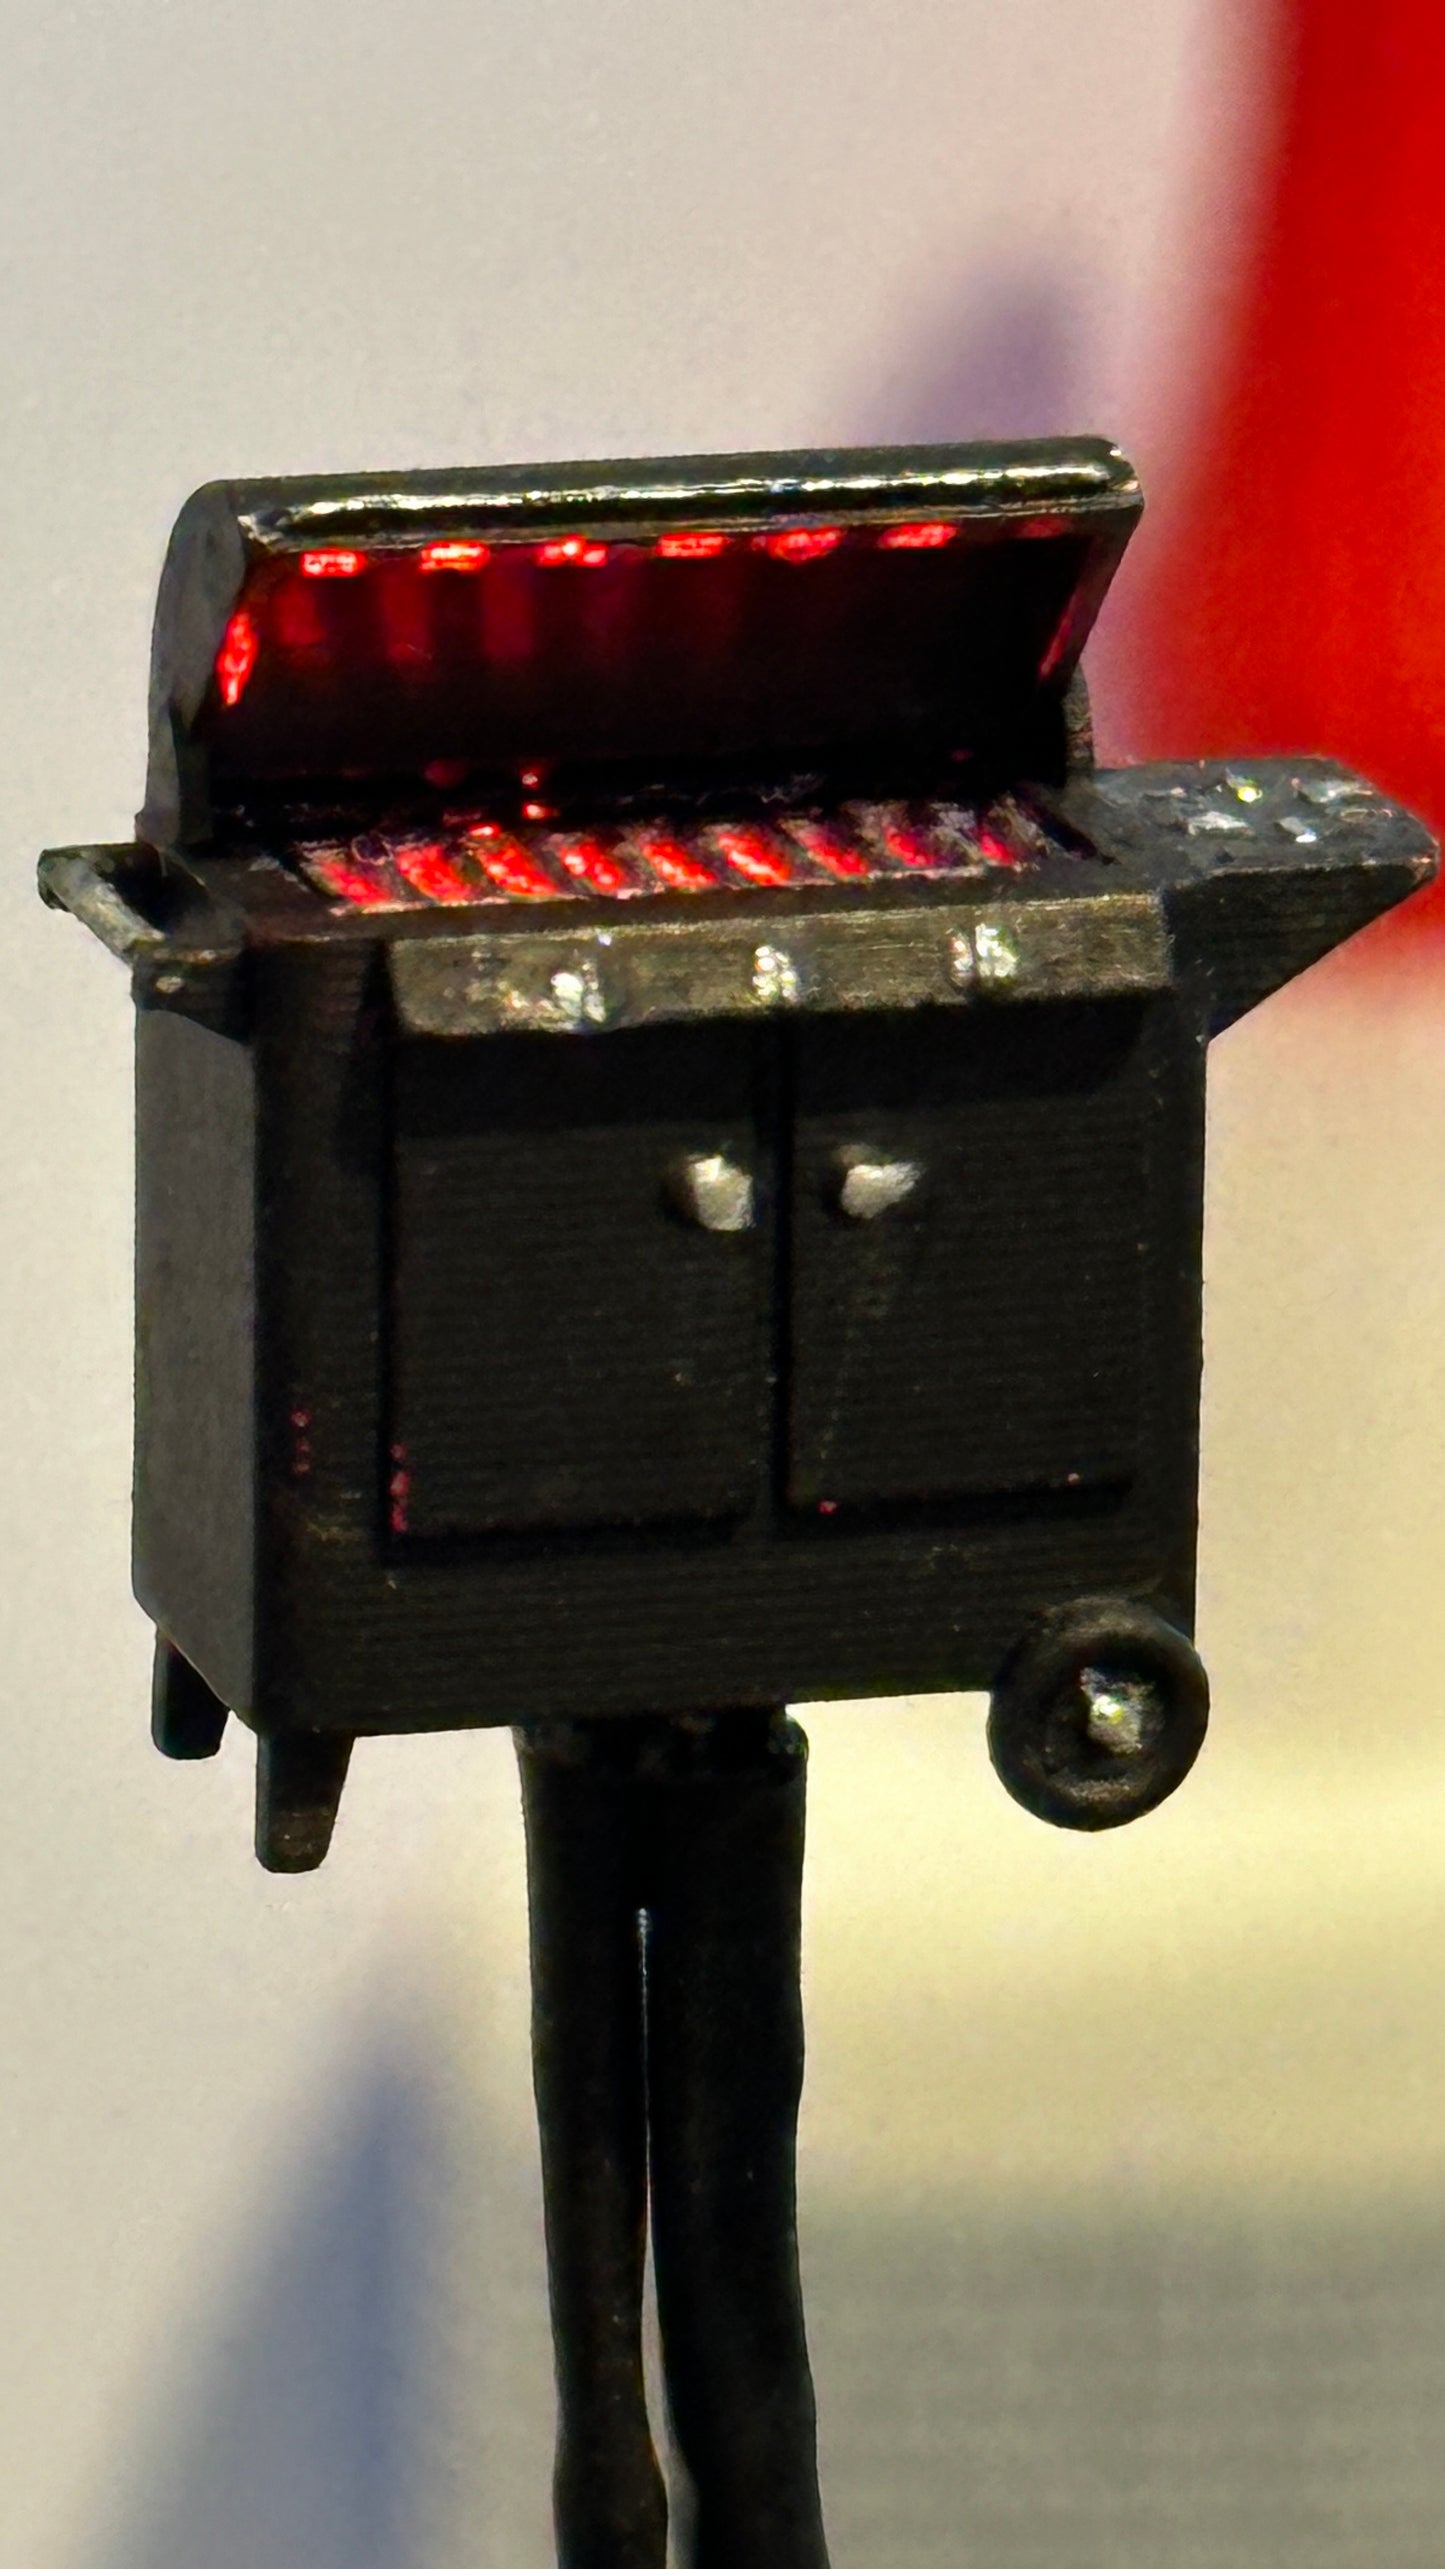 OO Gauge Gas BBQ with 12V Flickering LED